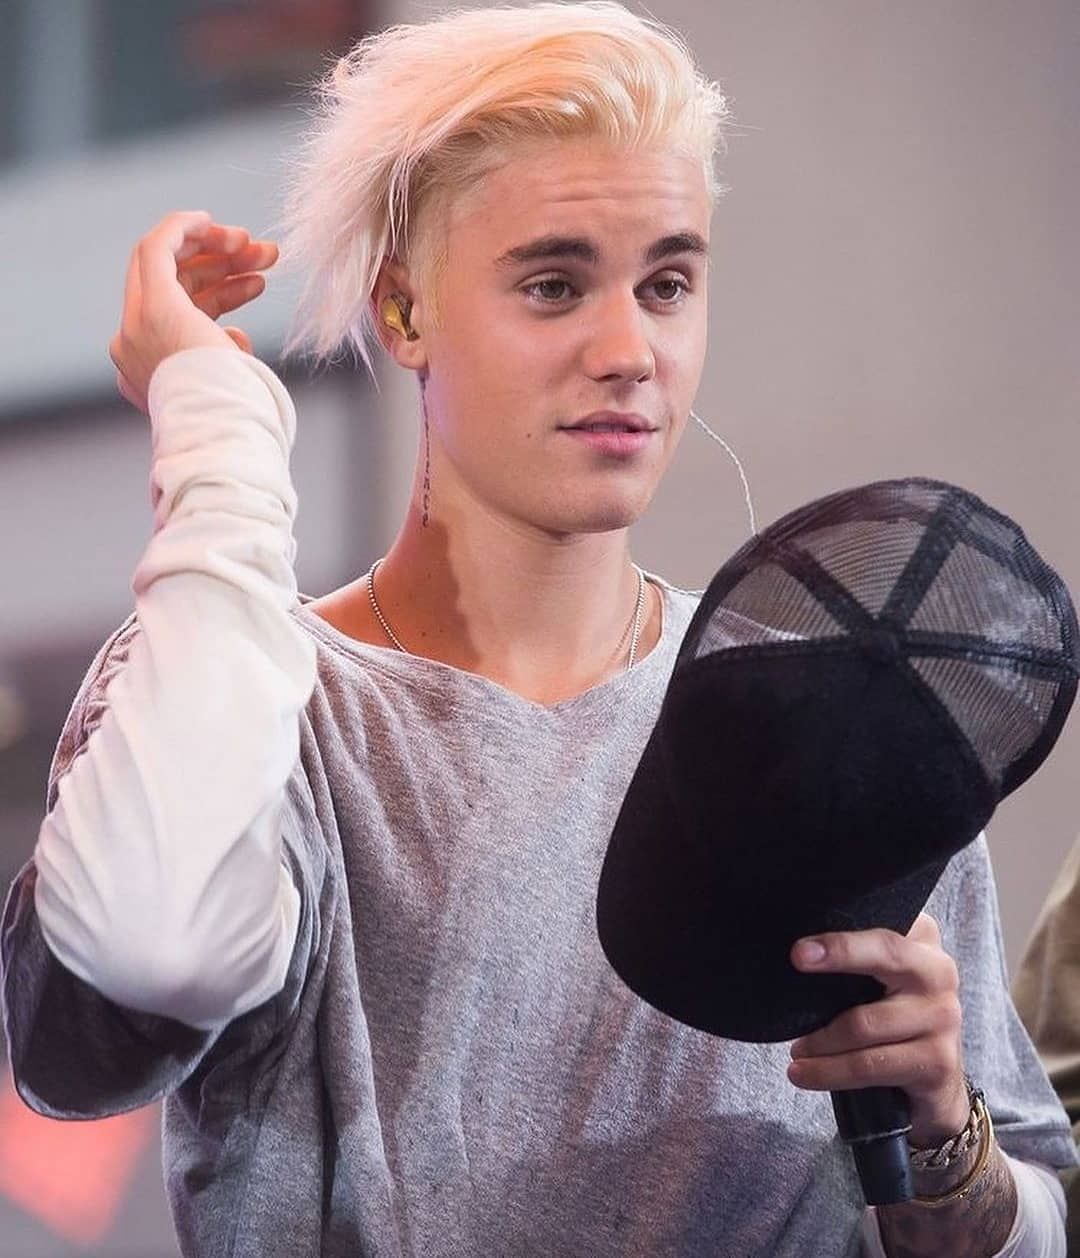 Justin Bieber Reveals New Haircut On Twitter (PHOTOS) | HuffPost Style